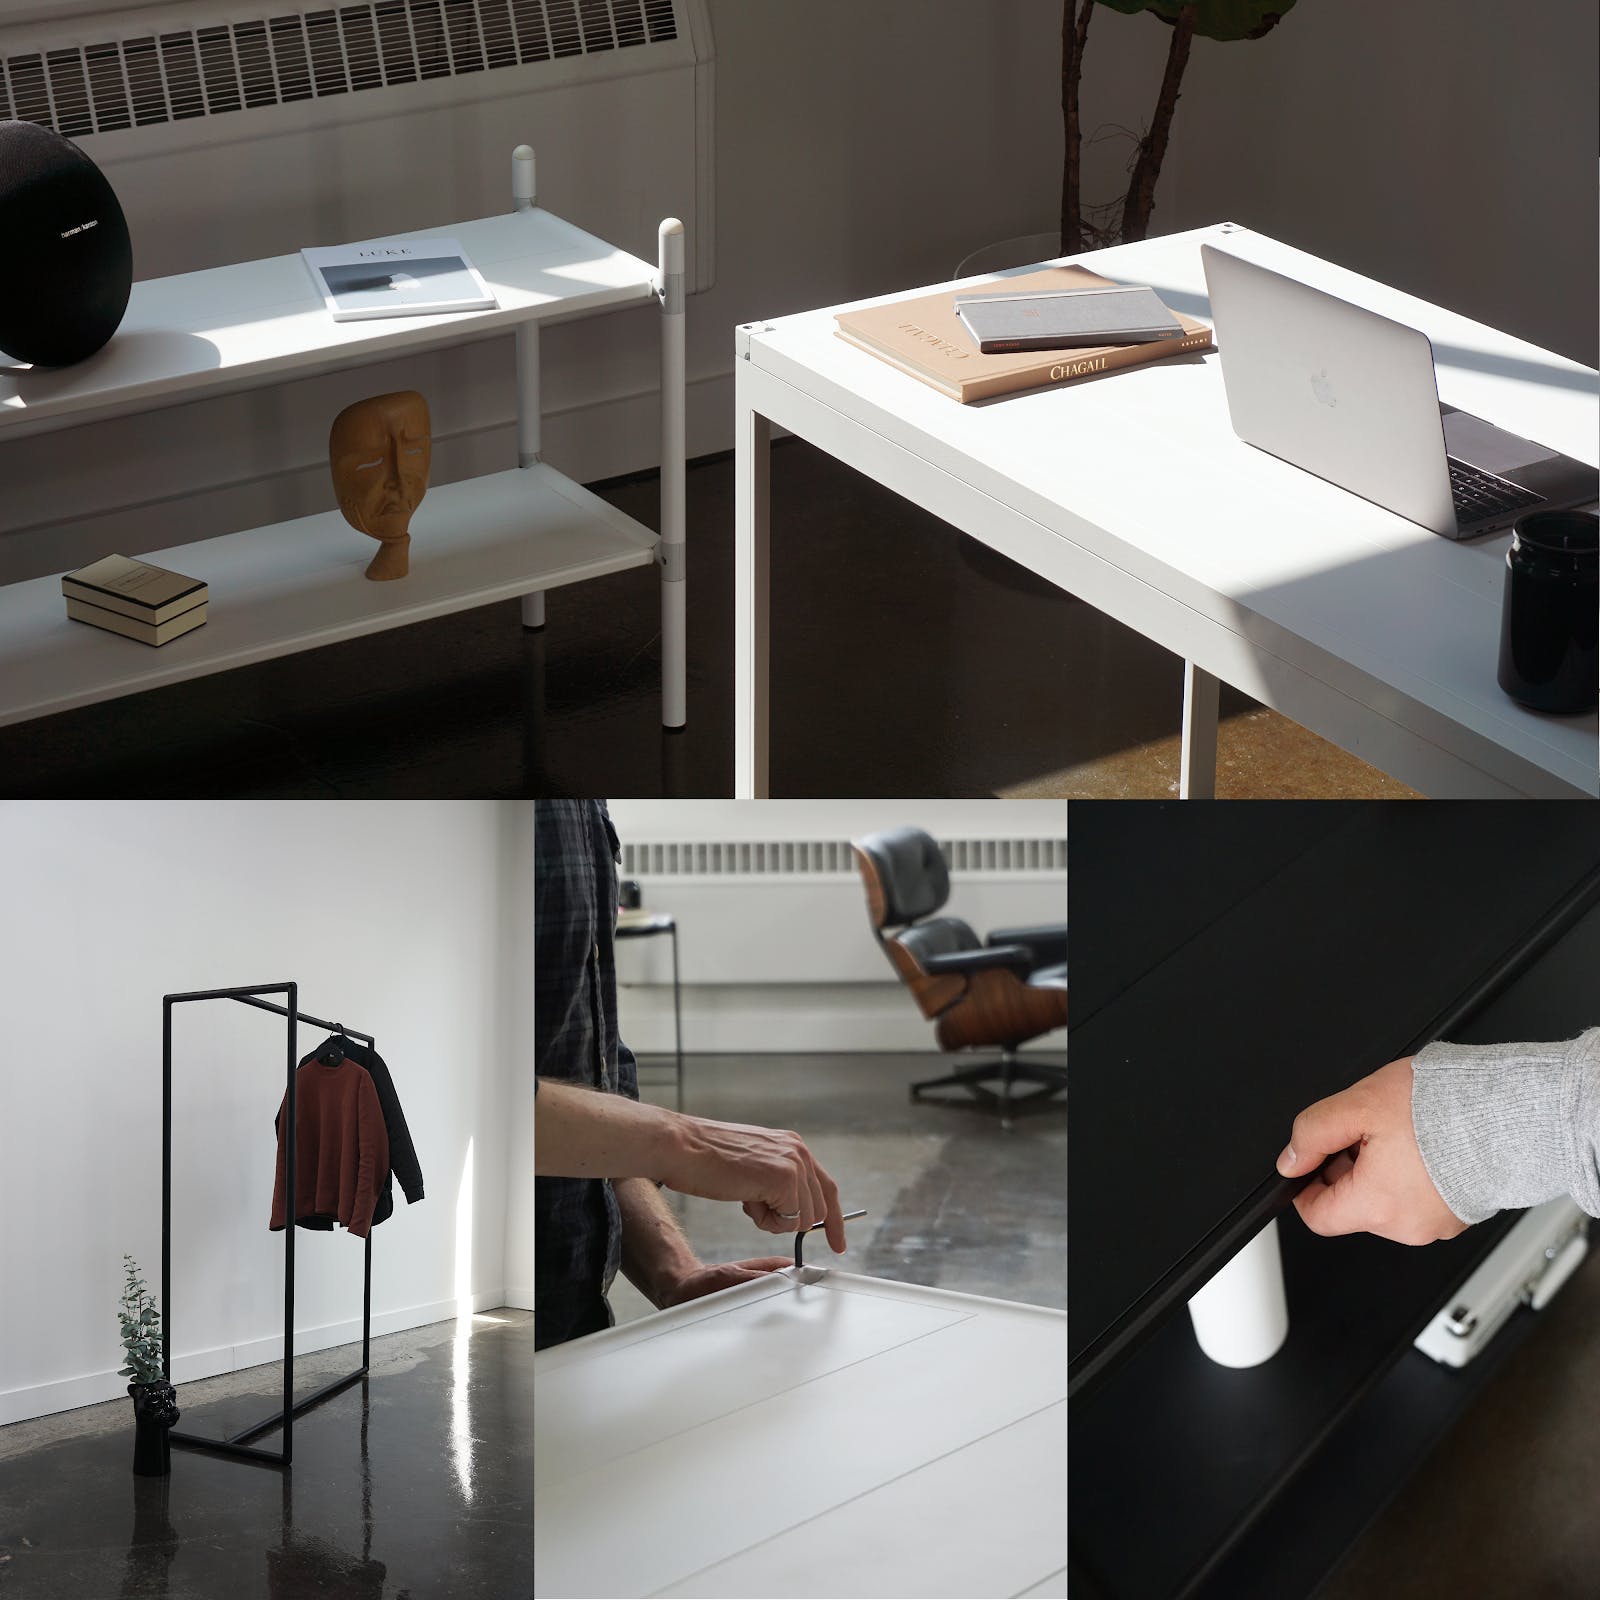 Aalo 2.0: Adaptable, durable & sustainable furniture designed for city living.